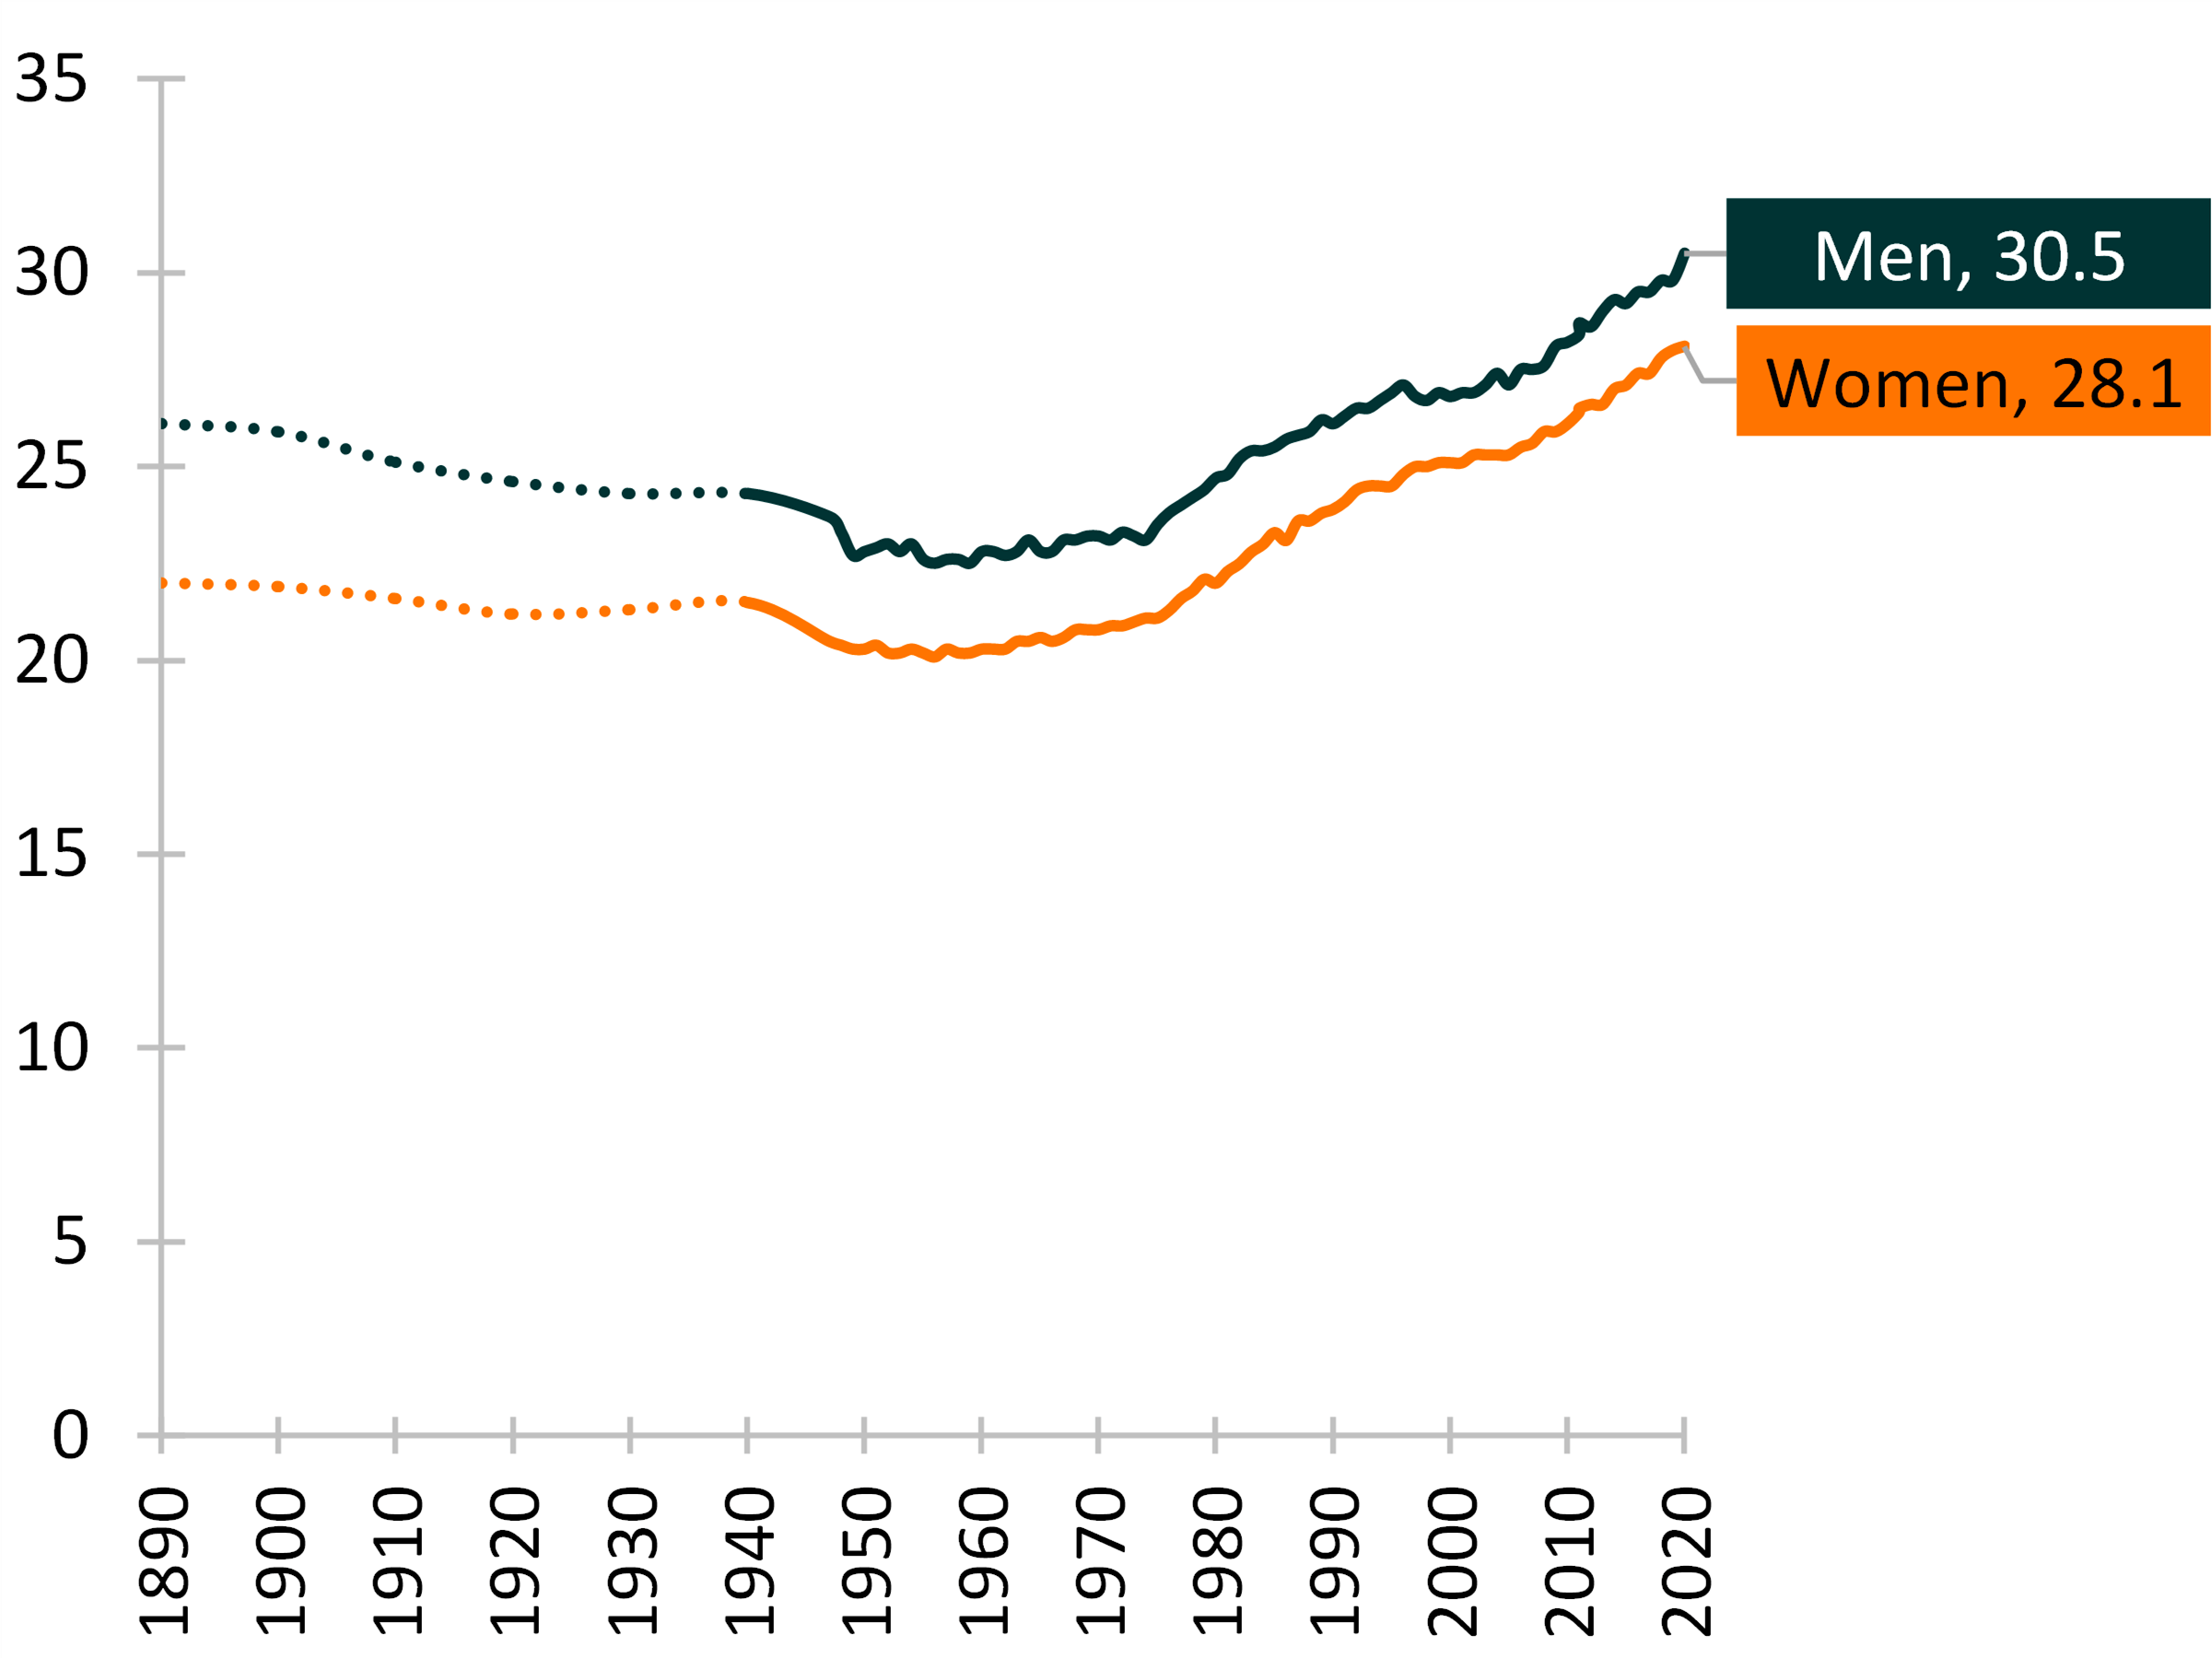 teal and orange line chart showing   Figure 1. Median Age at First Marriage in the U.S., 1890-2020